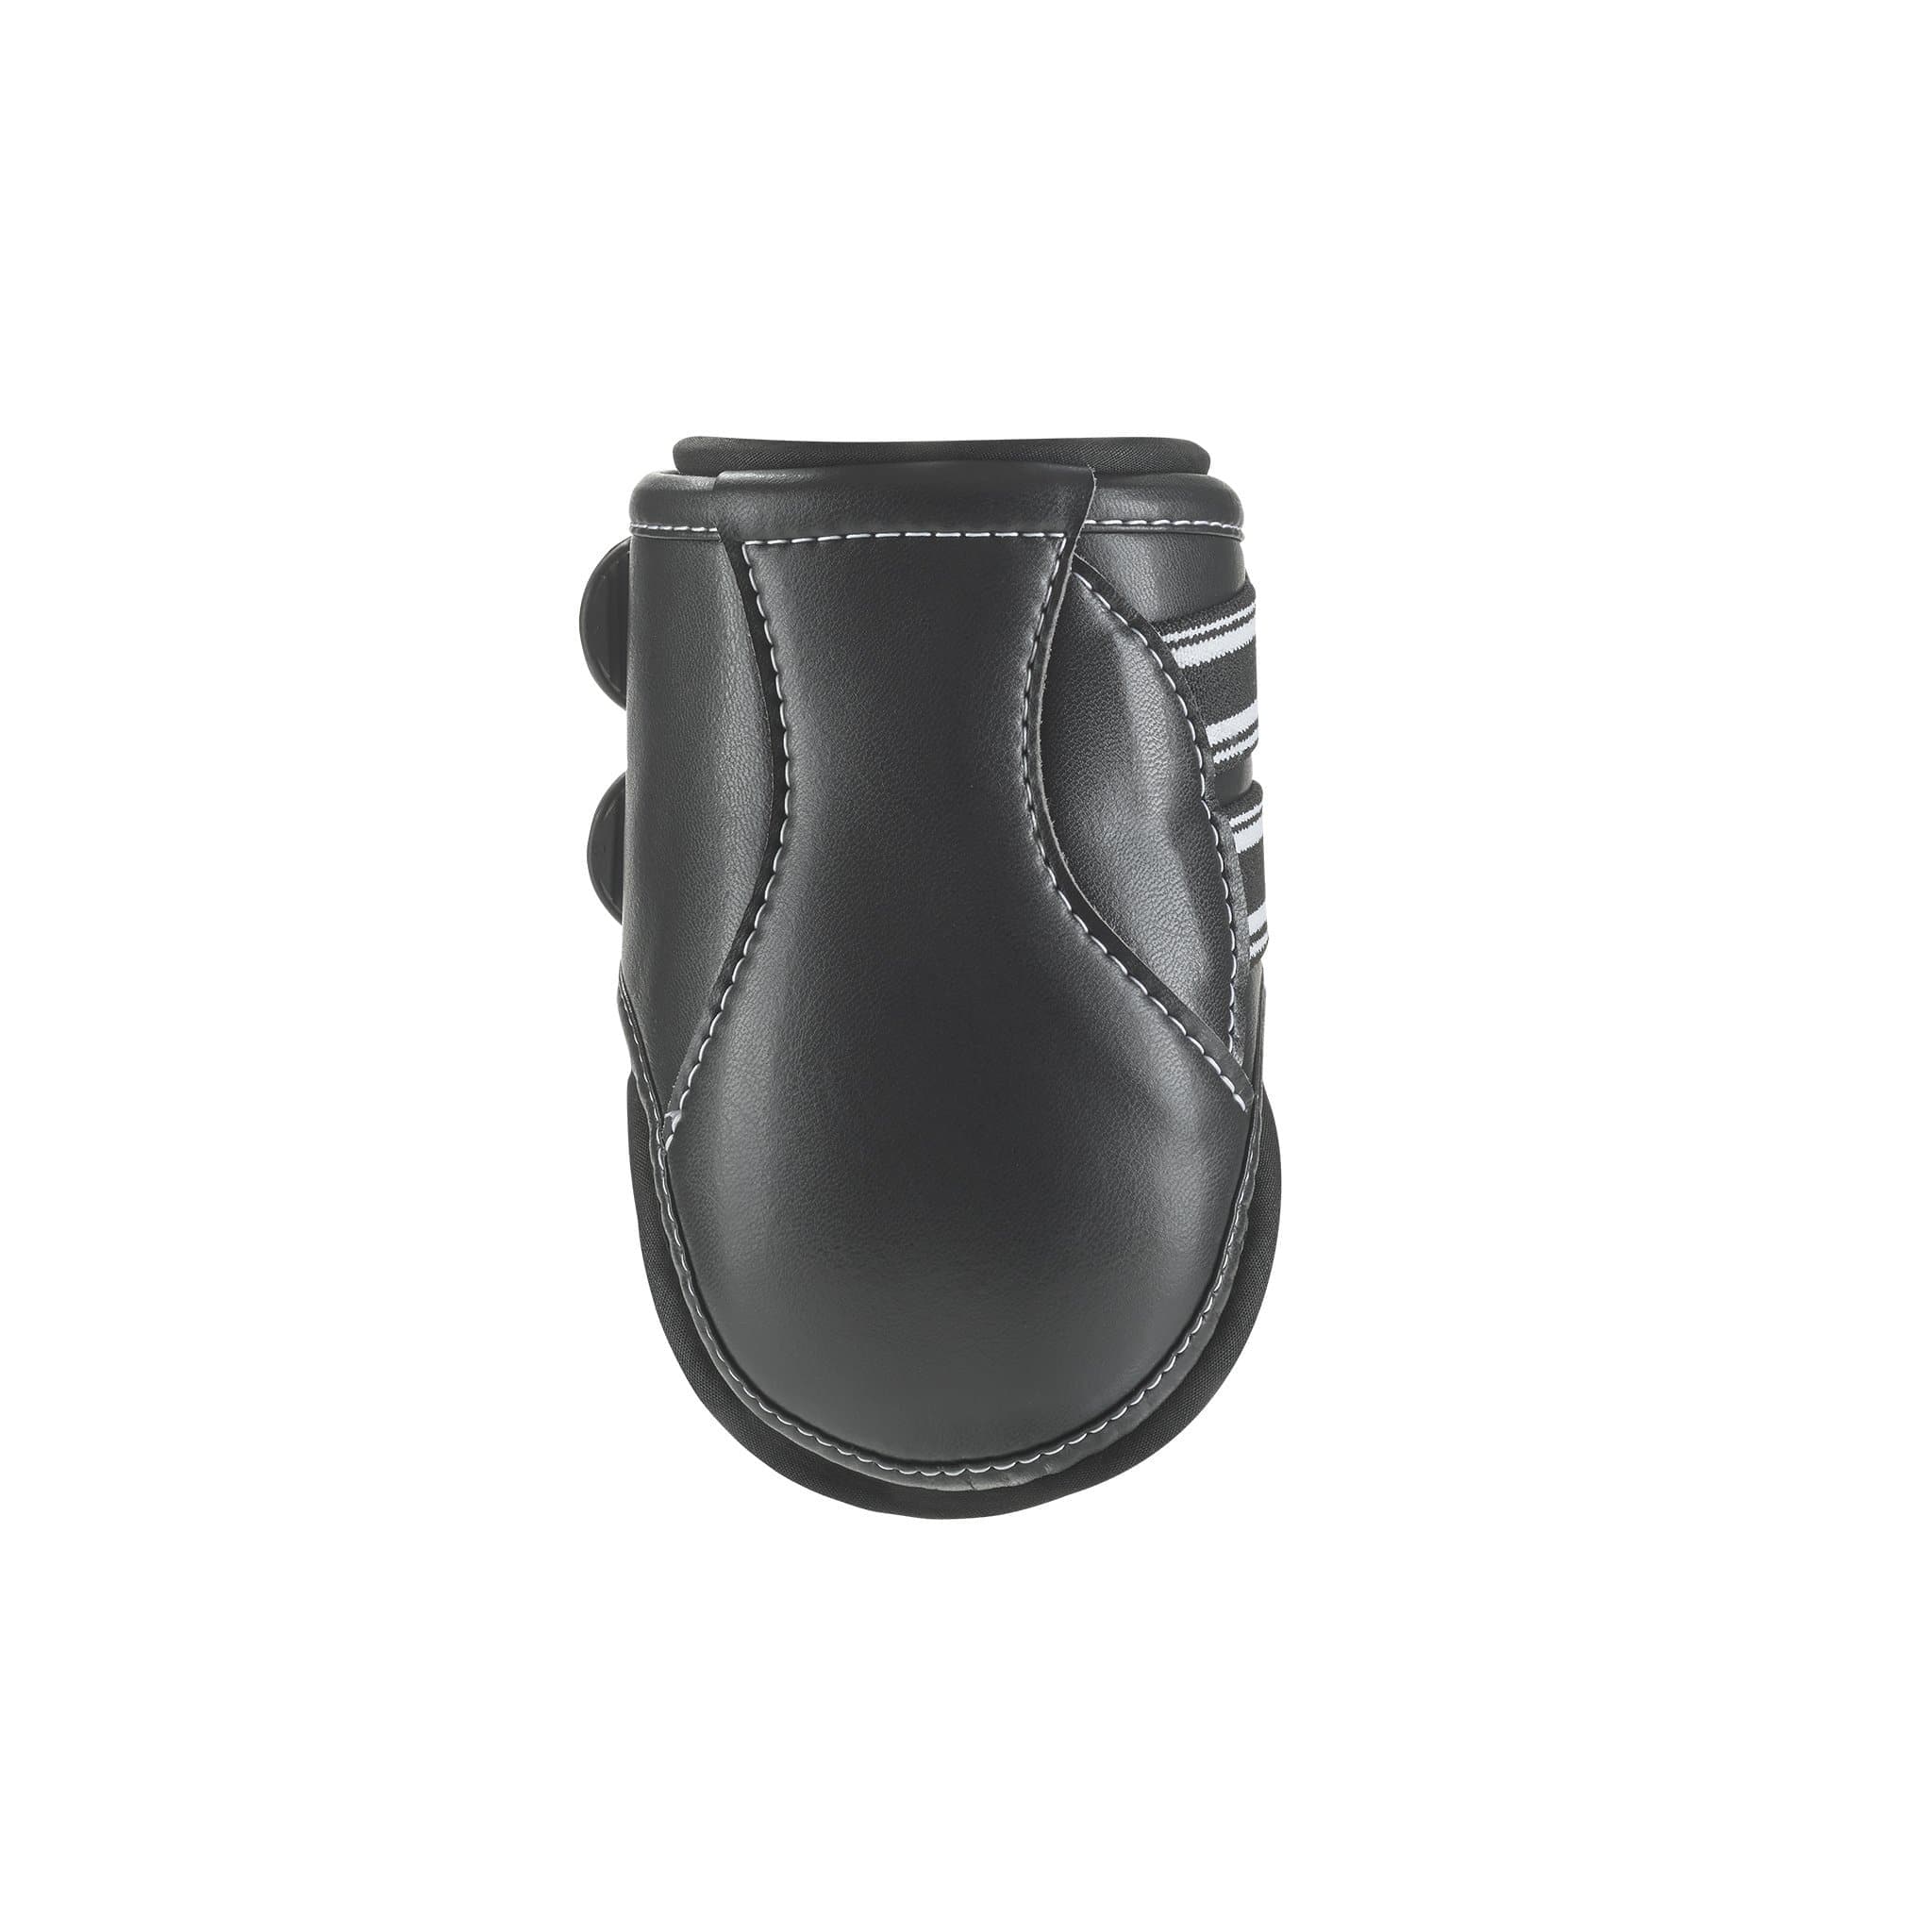 EquiFit D-Teq Hind Boot with ImpacTeq Liner